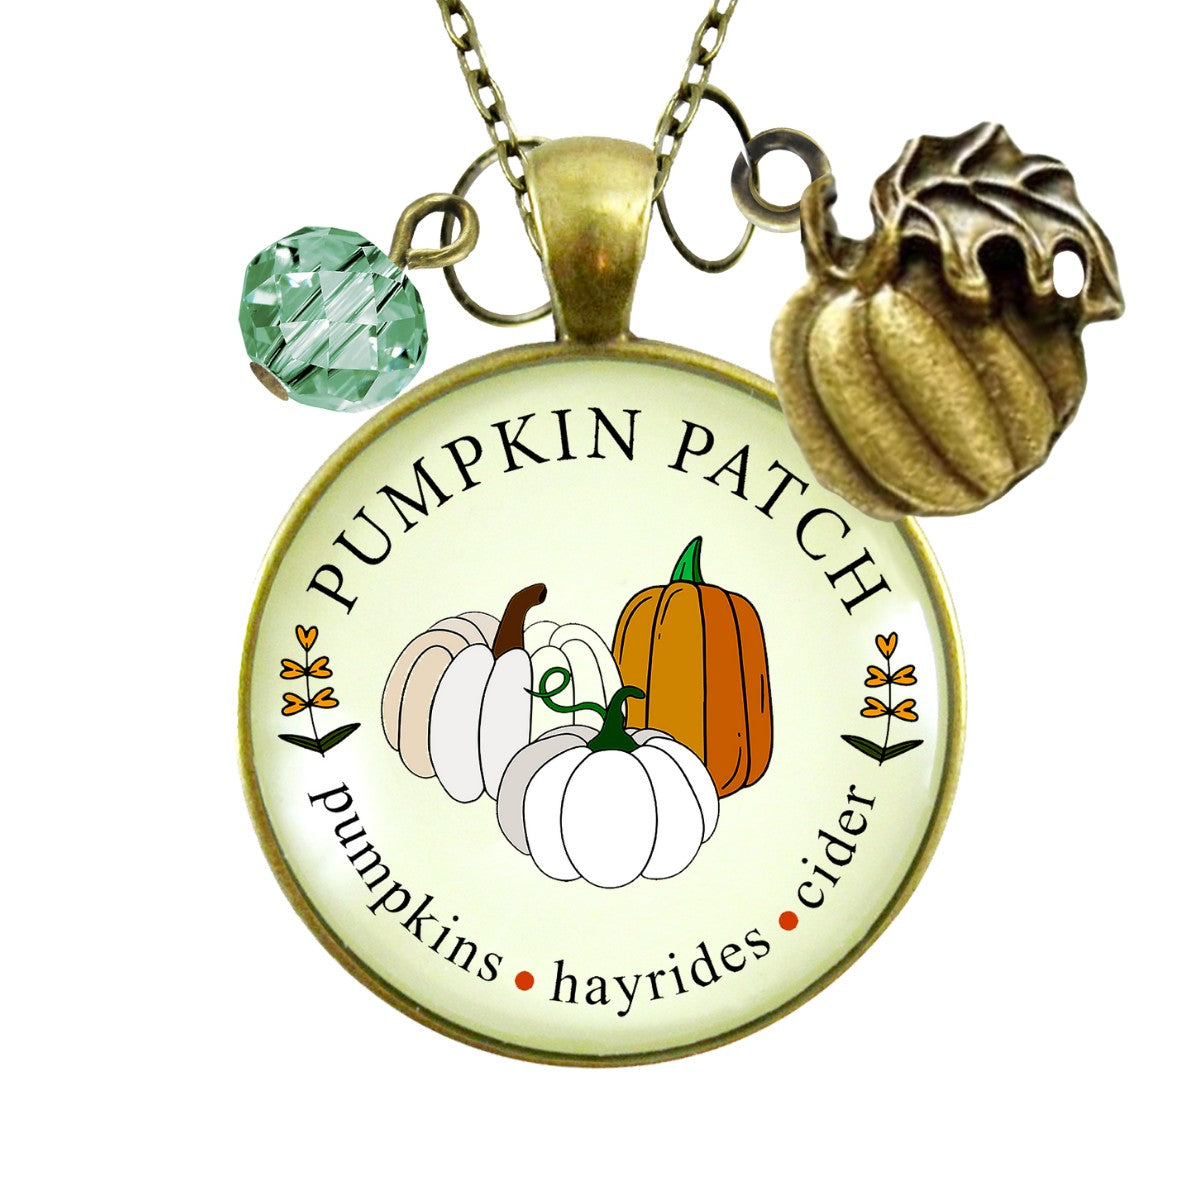 Pumpkin Patch Necklace Hayrides Cider Favorite Fall Season Autumn Theme Jewelry For Women Bronze Charm  Necklace - Gutsy Goodness Handmade Jewelry